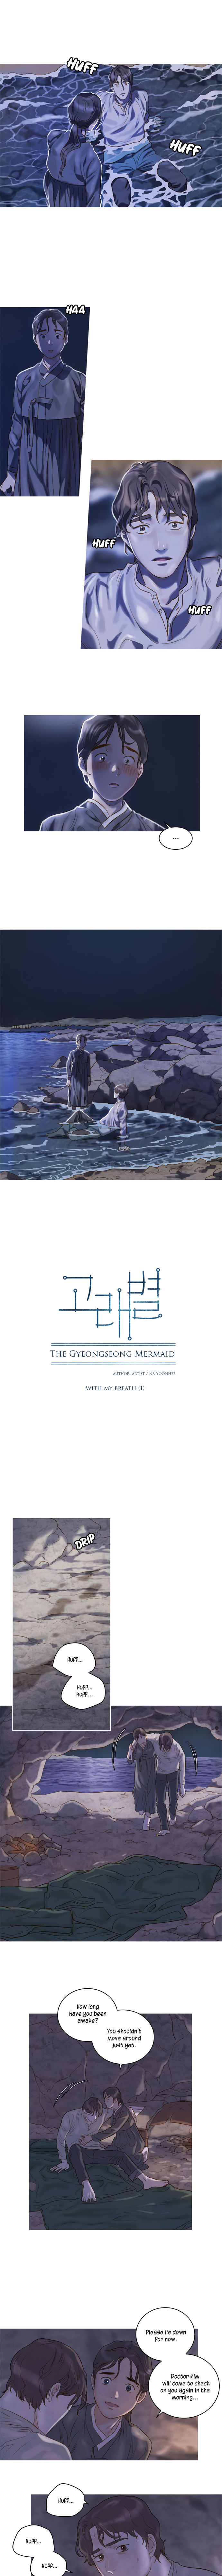 Gorae Byul - The Gyeongseong Mermaid - Chapter 3 Page 1